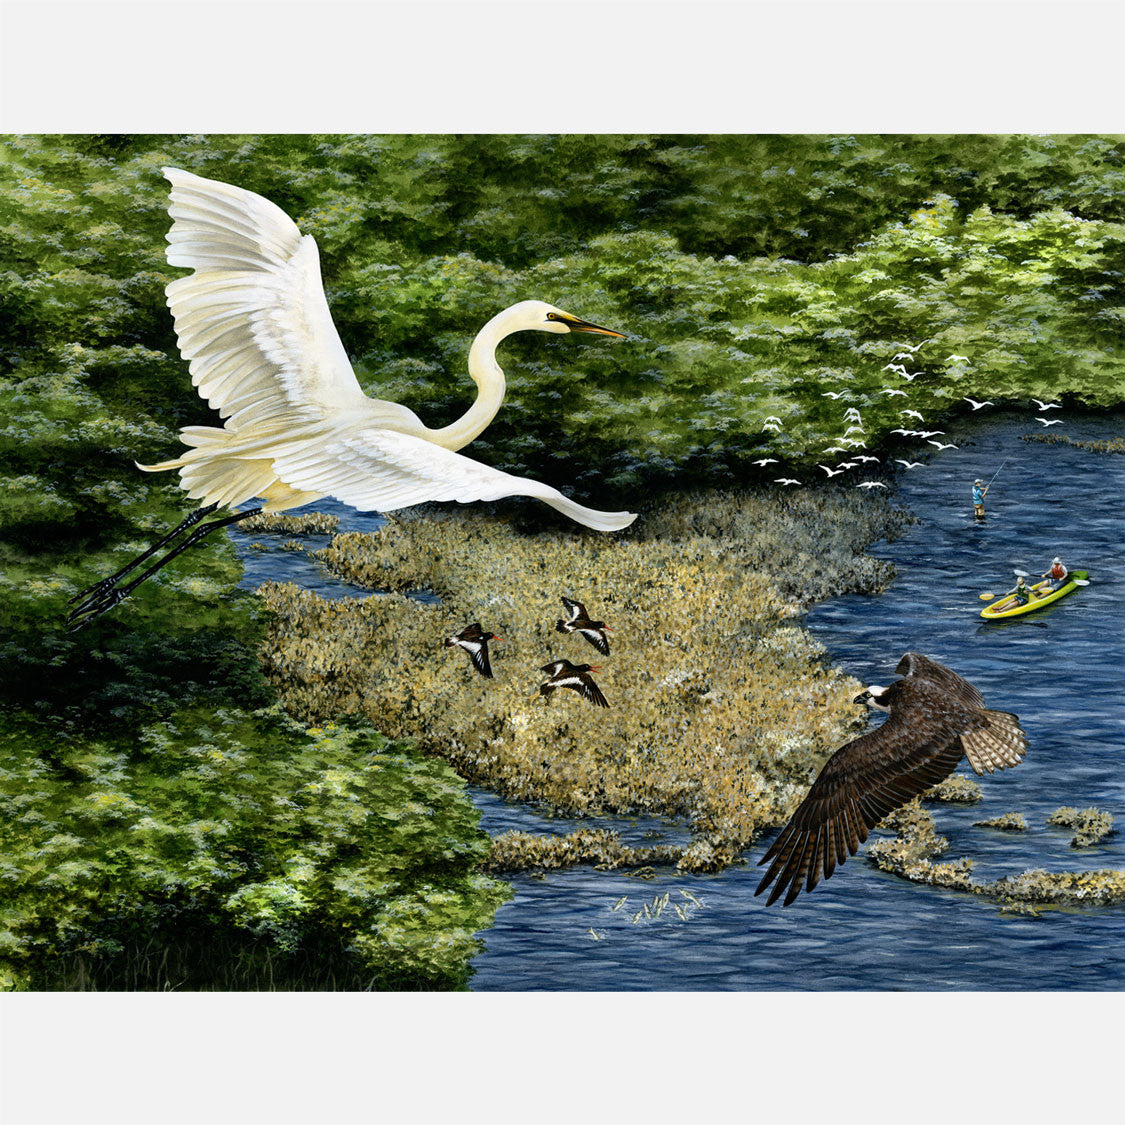 This beautiful, highly detailed and accurate illustration is of an oyster reef from a bird's eye view featuring a great egret and an osprey.